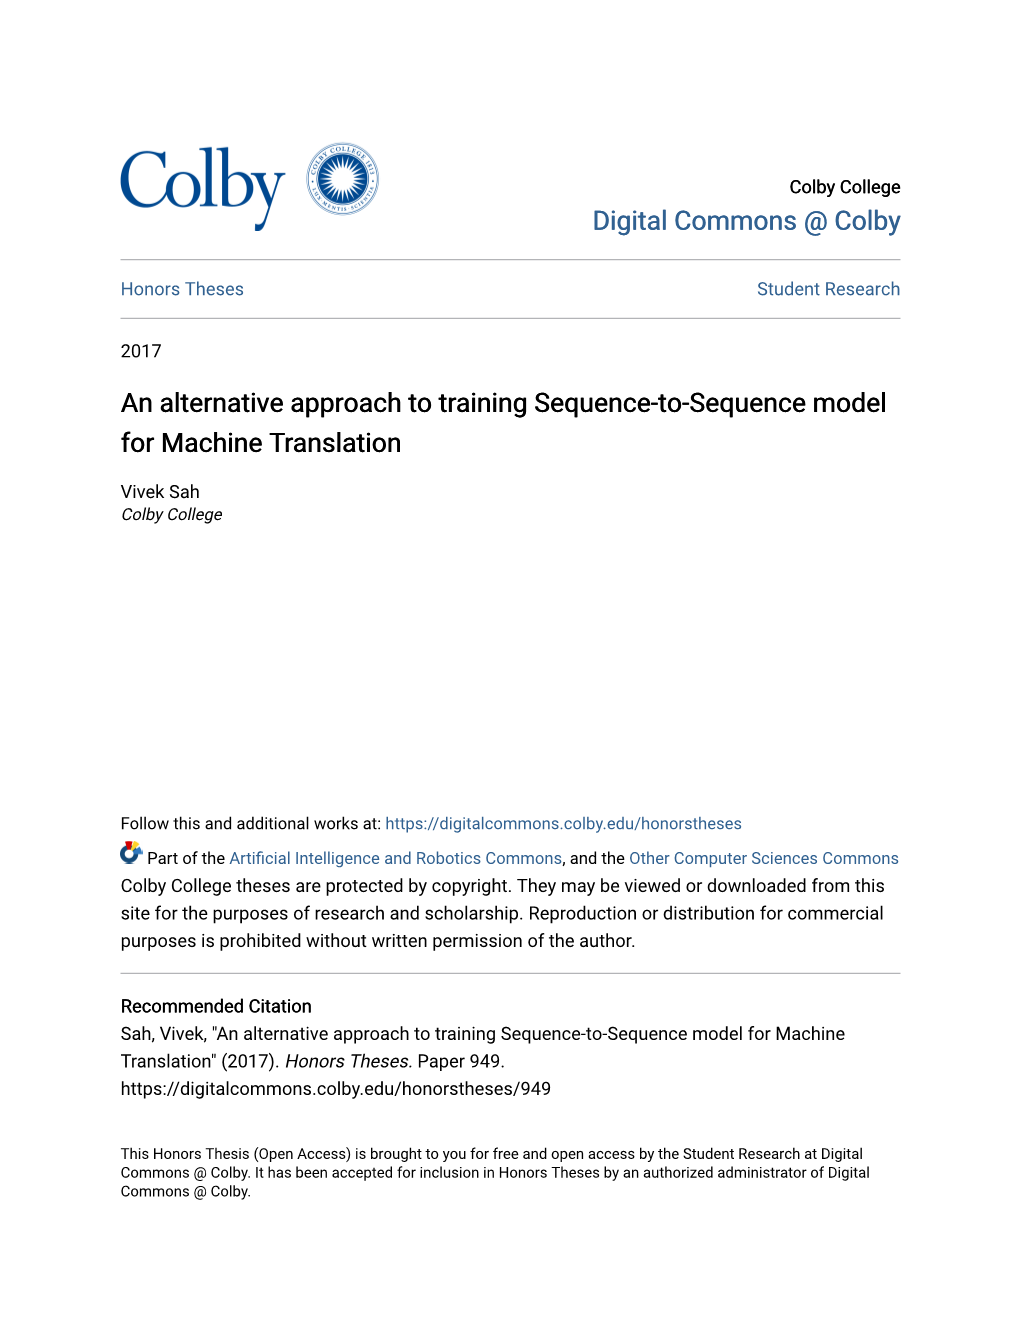 An Alternative Approach to Training Sequence-To-Sequence Model for Machine Translation